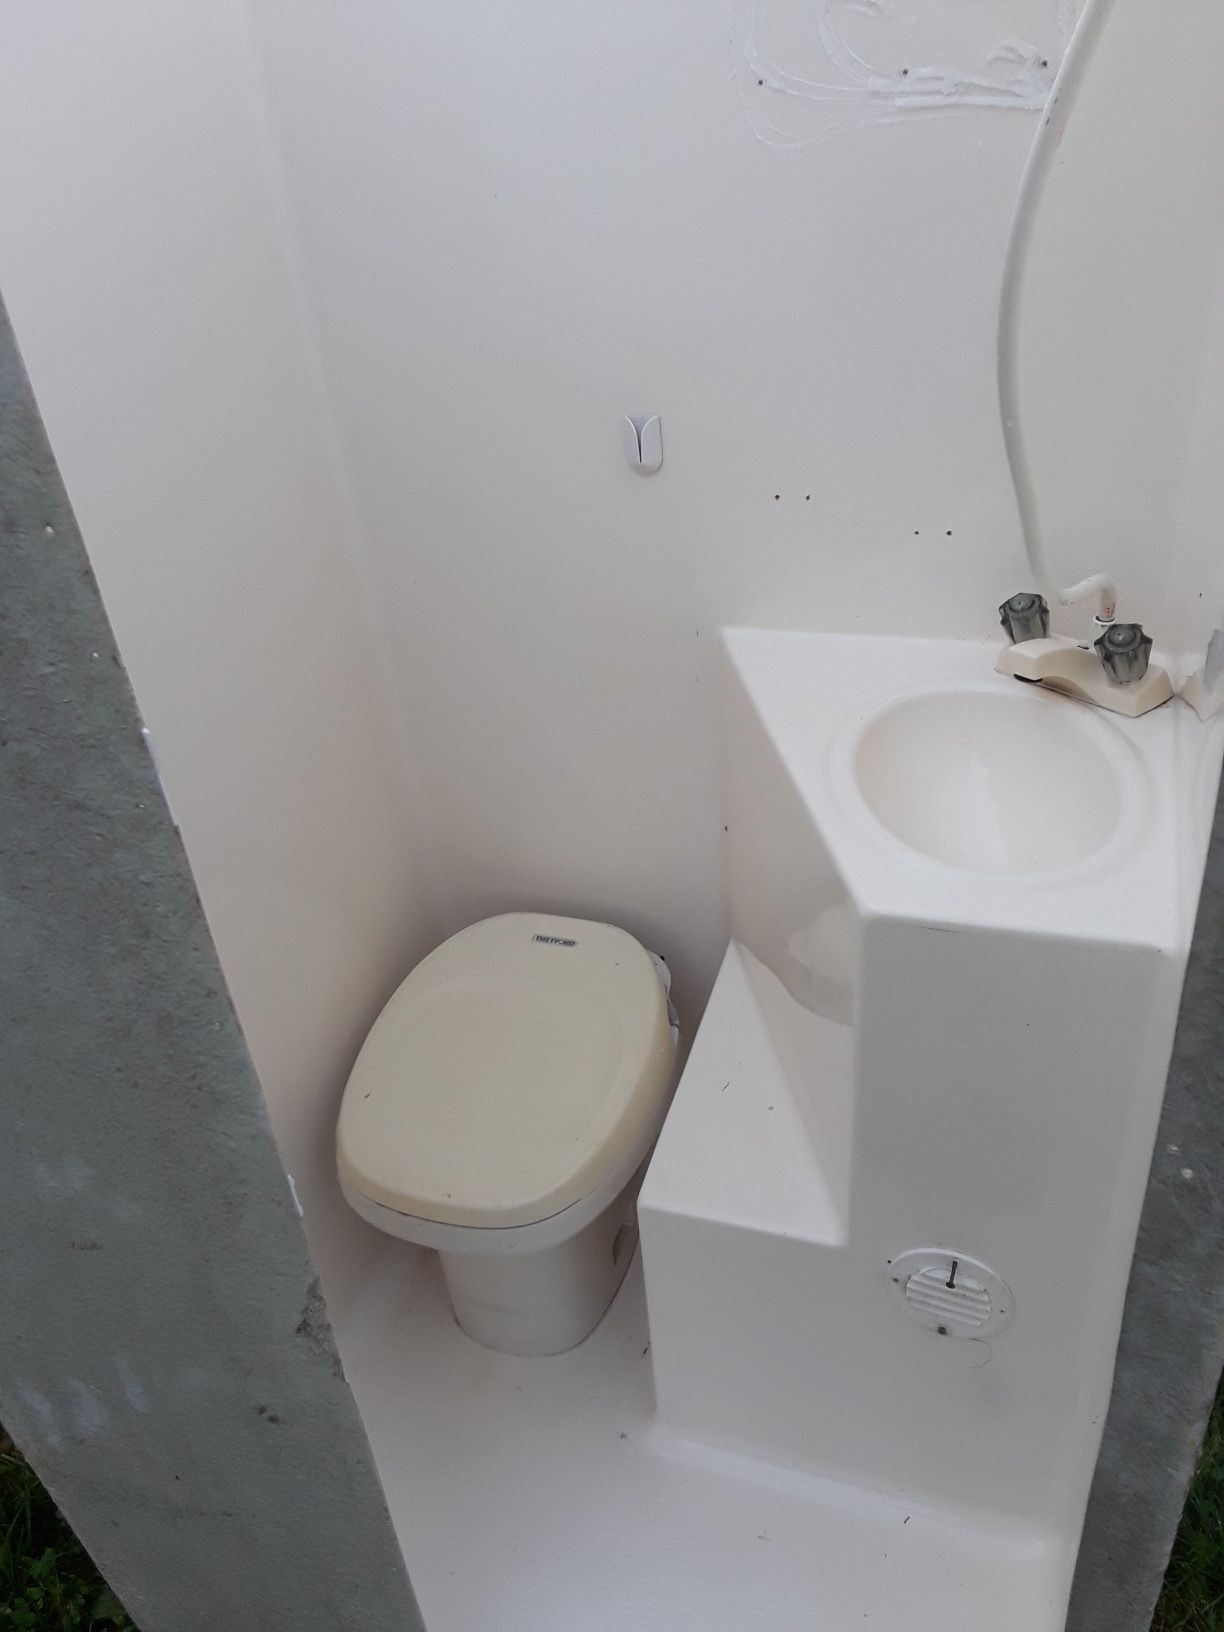 All-in-one fiberglass bathroom for camper or tiny house